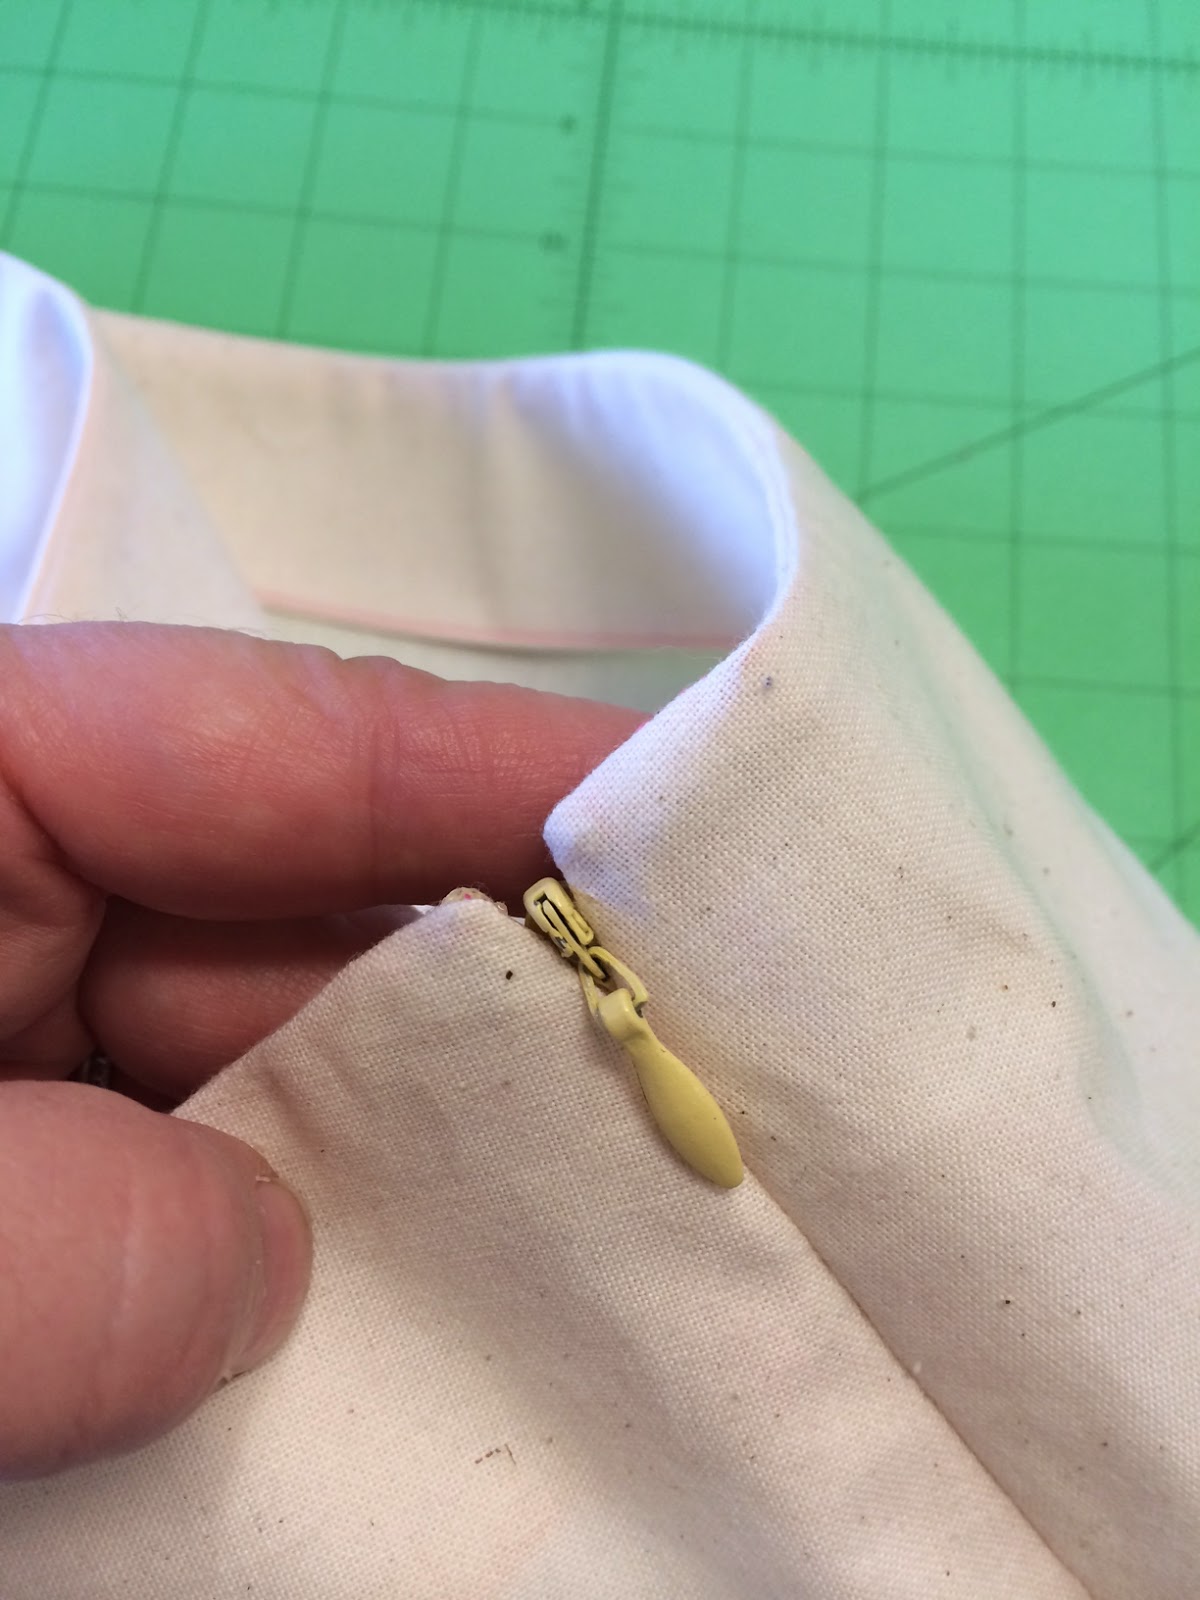 Sewing an Invisible (Concealed) Zipper into a Seam - The Assembly